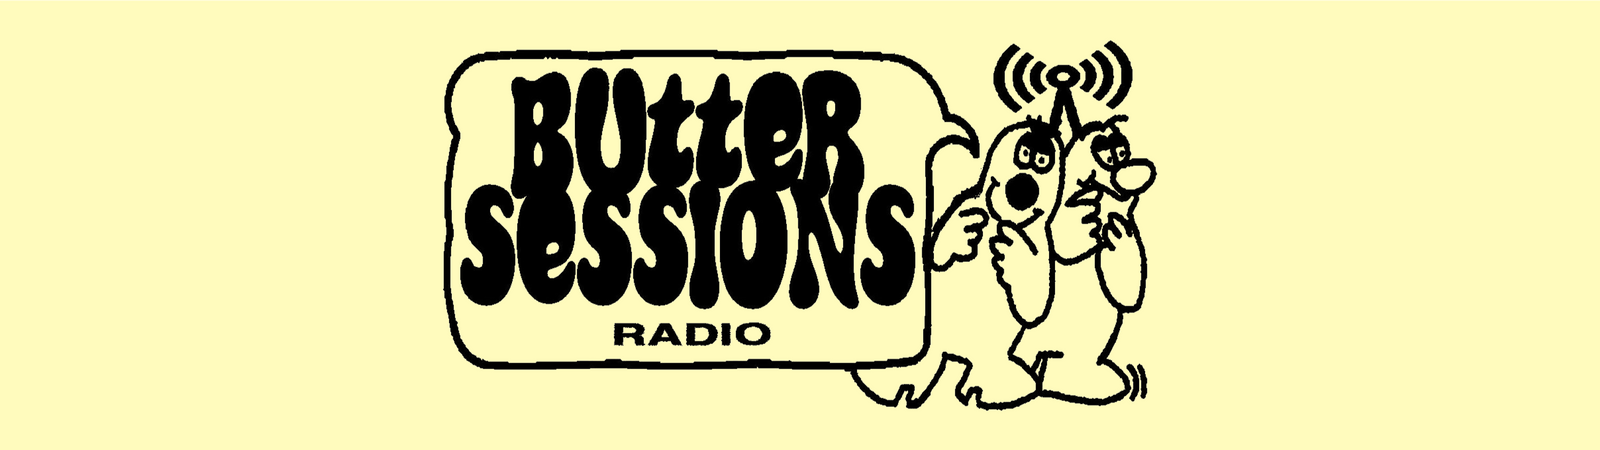 Butter Sessions